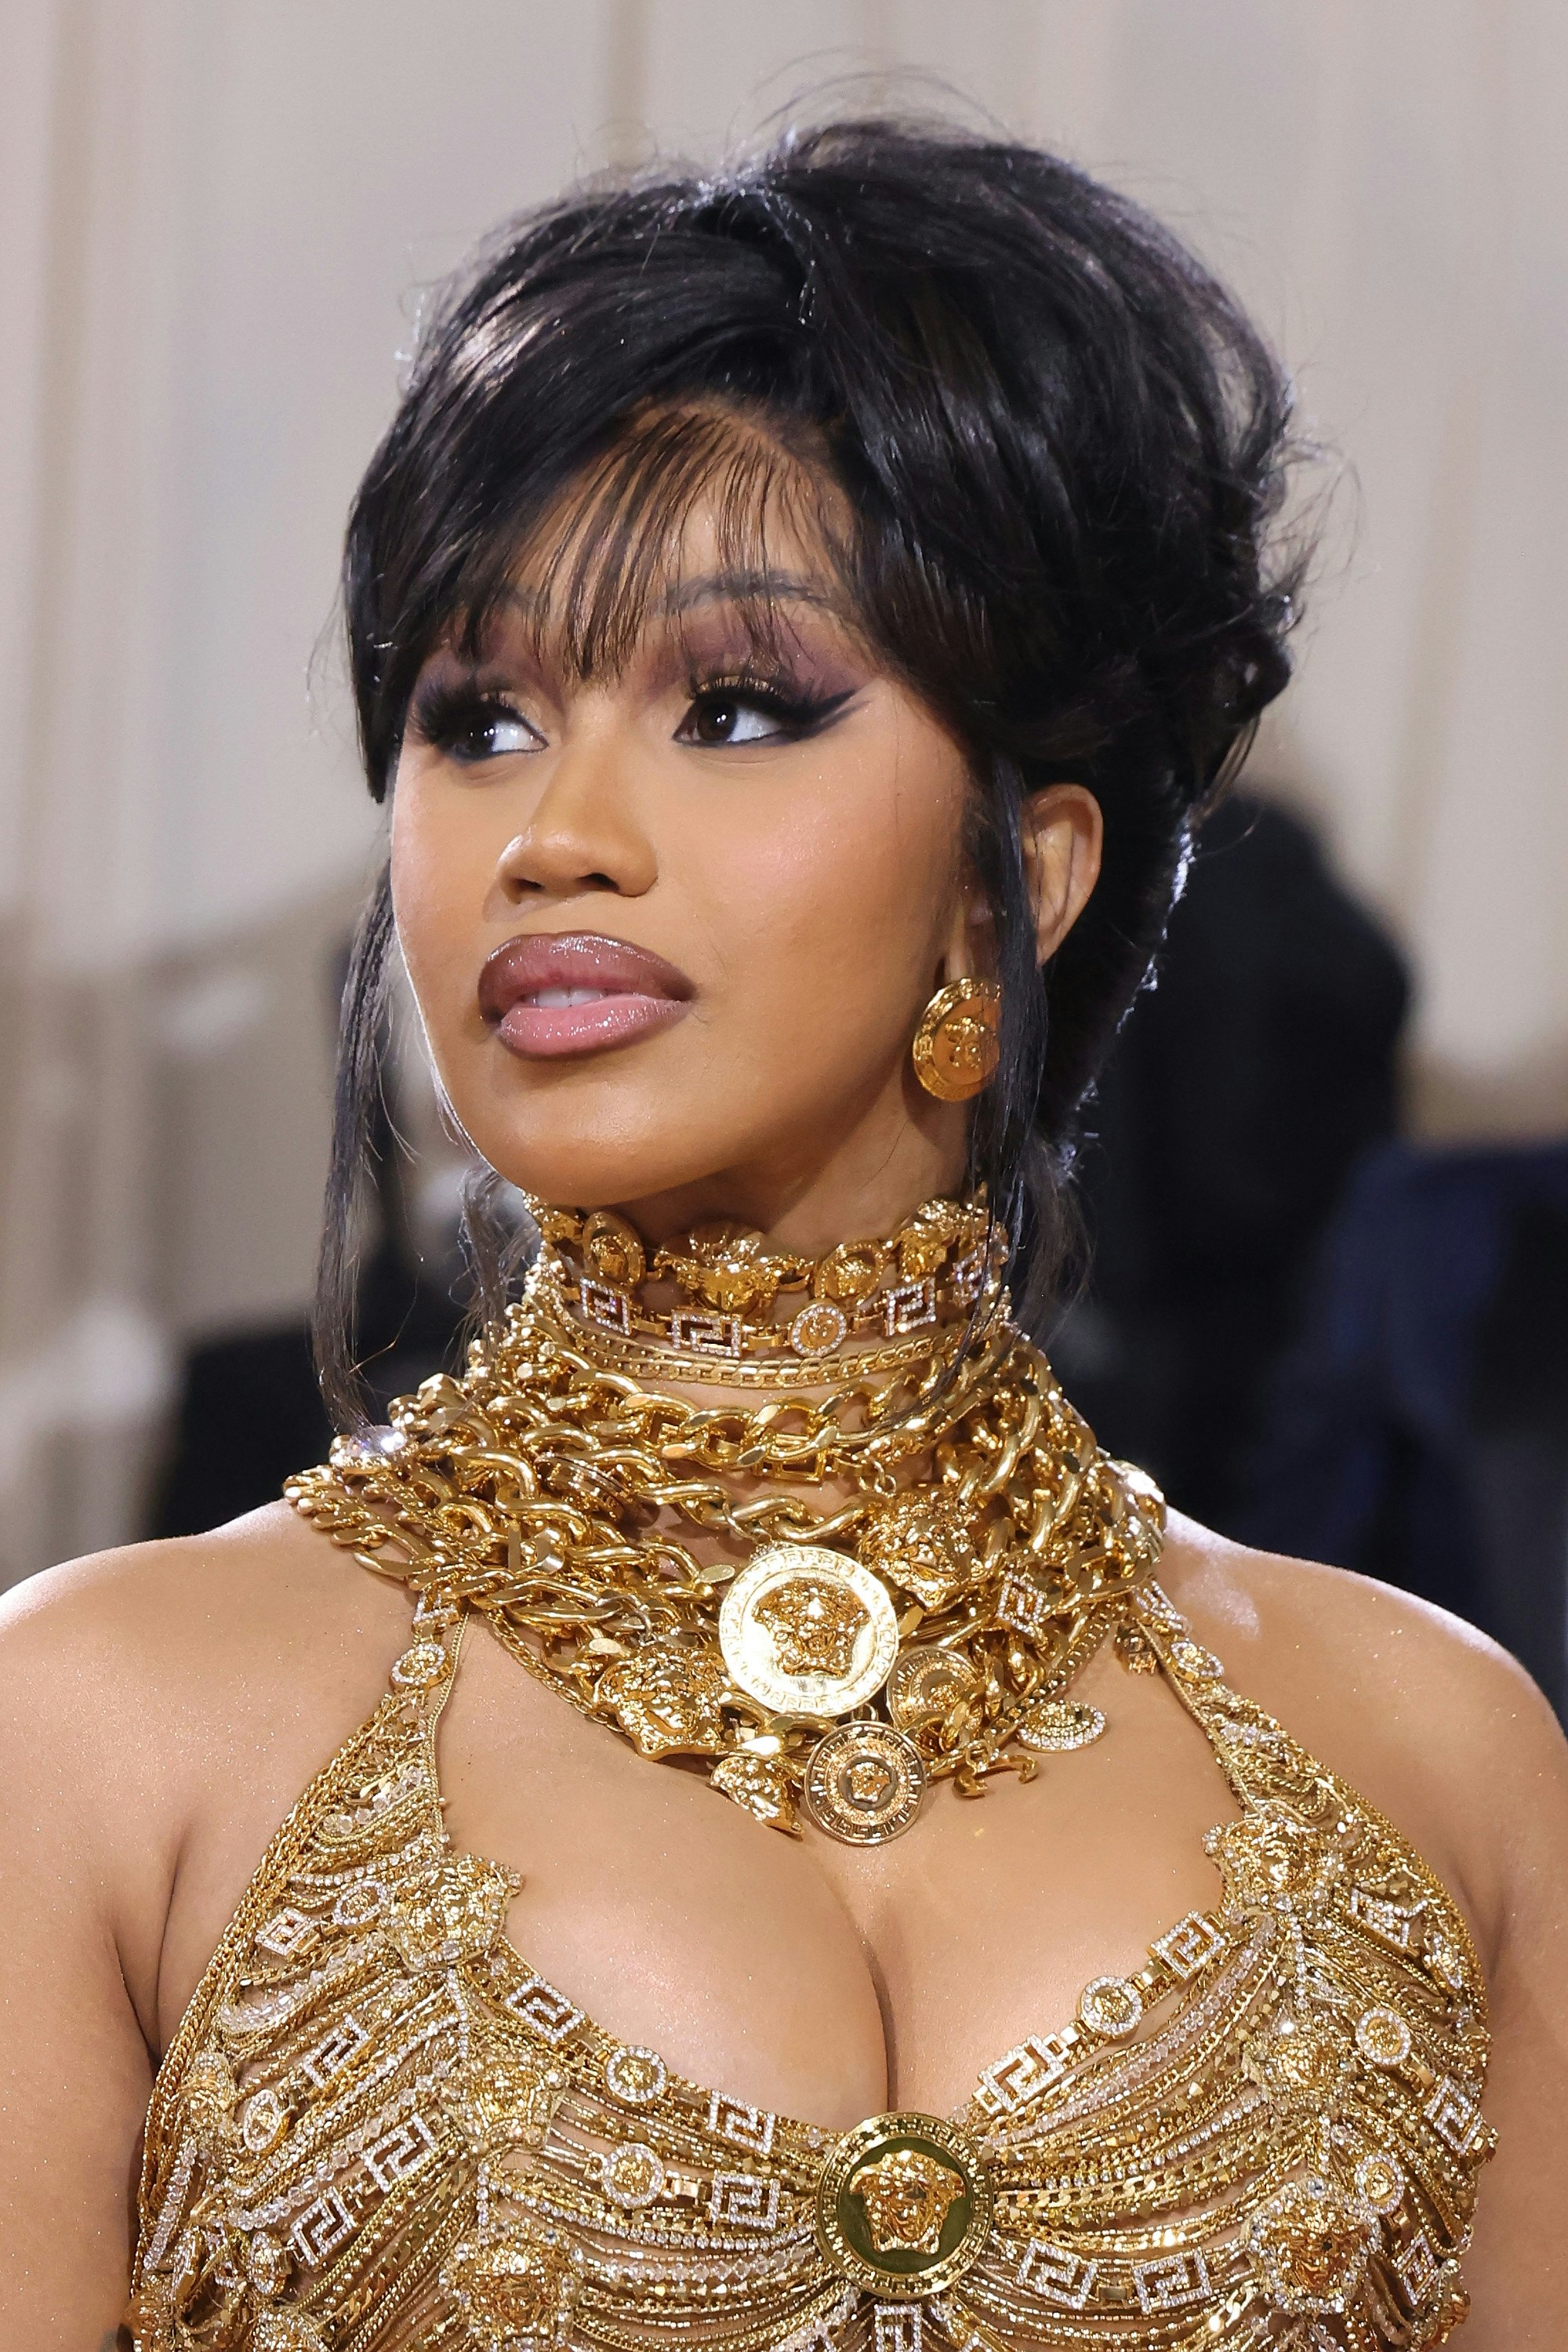 Cardi Bs new post about face tattoo shows a need for support validation  and seeking approval from fans says expert  The Sun